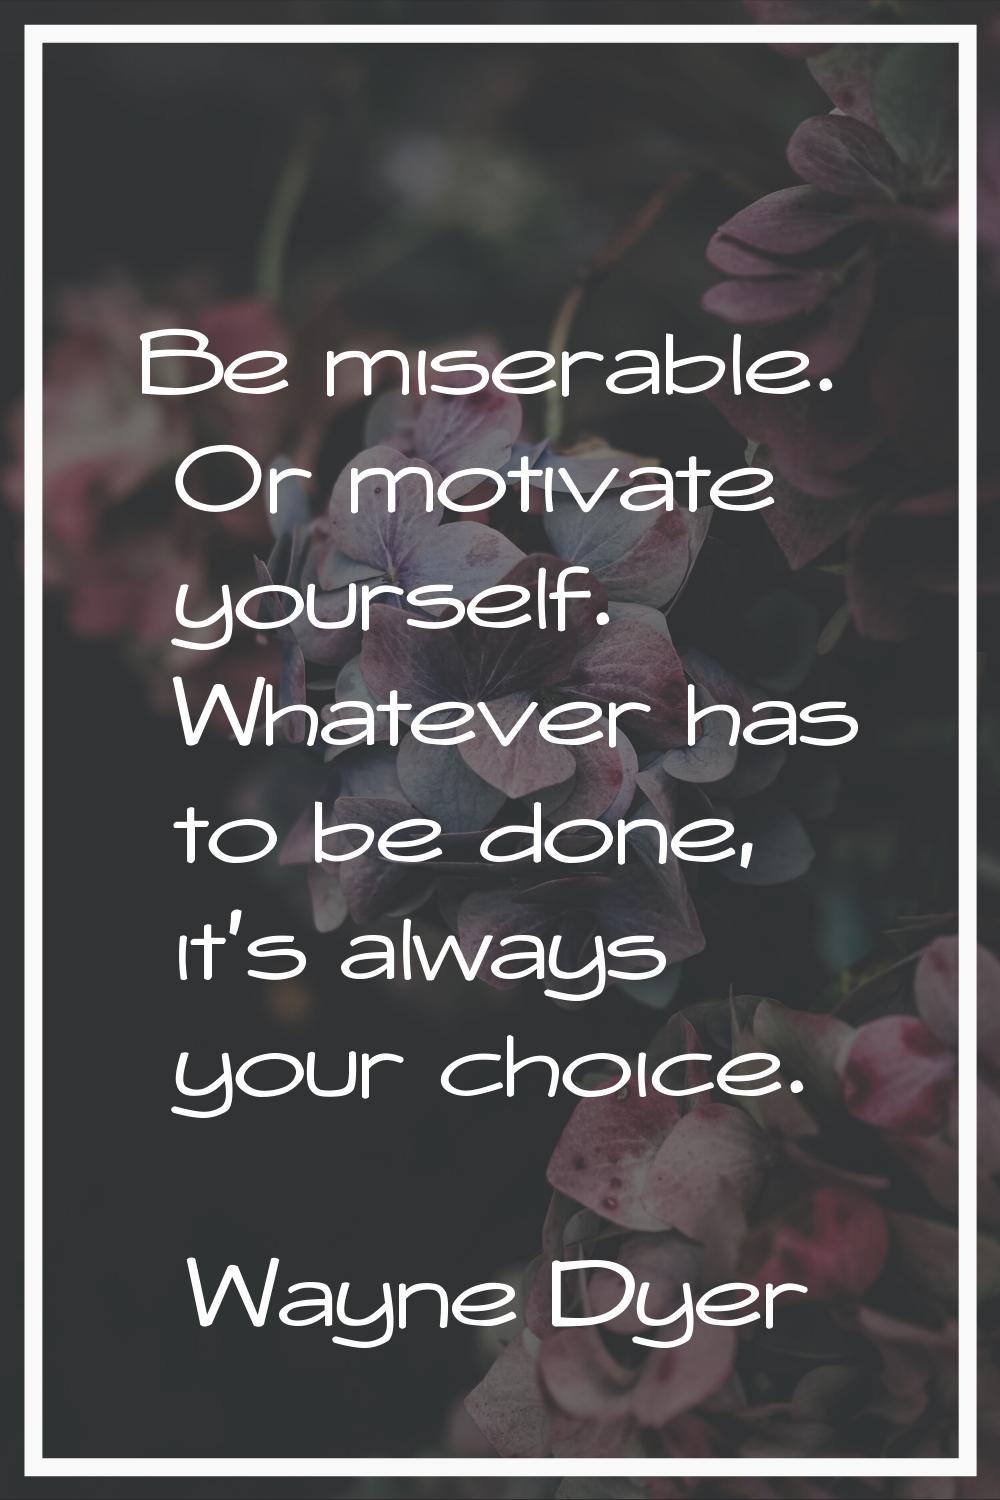 Be miserable. Or motivate yourself. Whatever has to be done, it's always your choice.